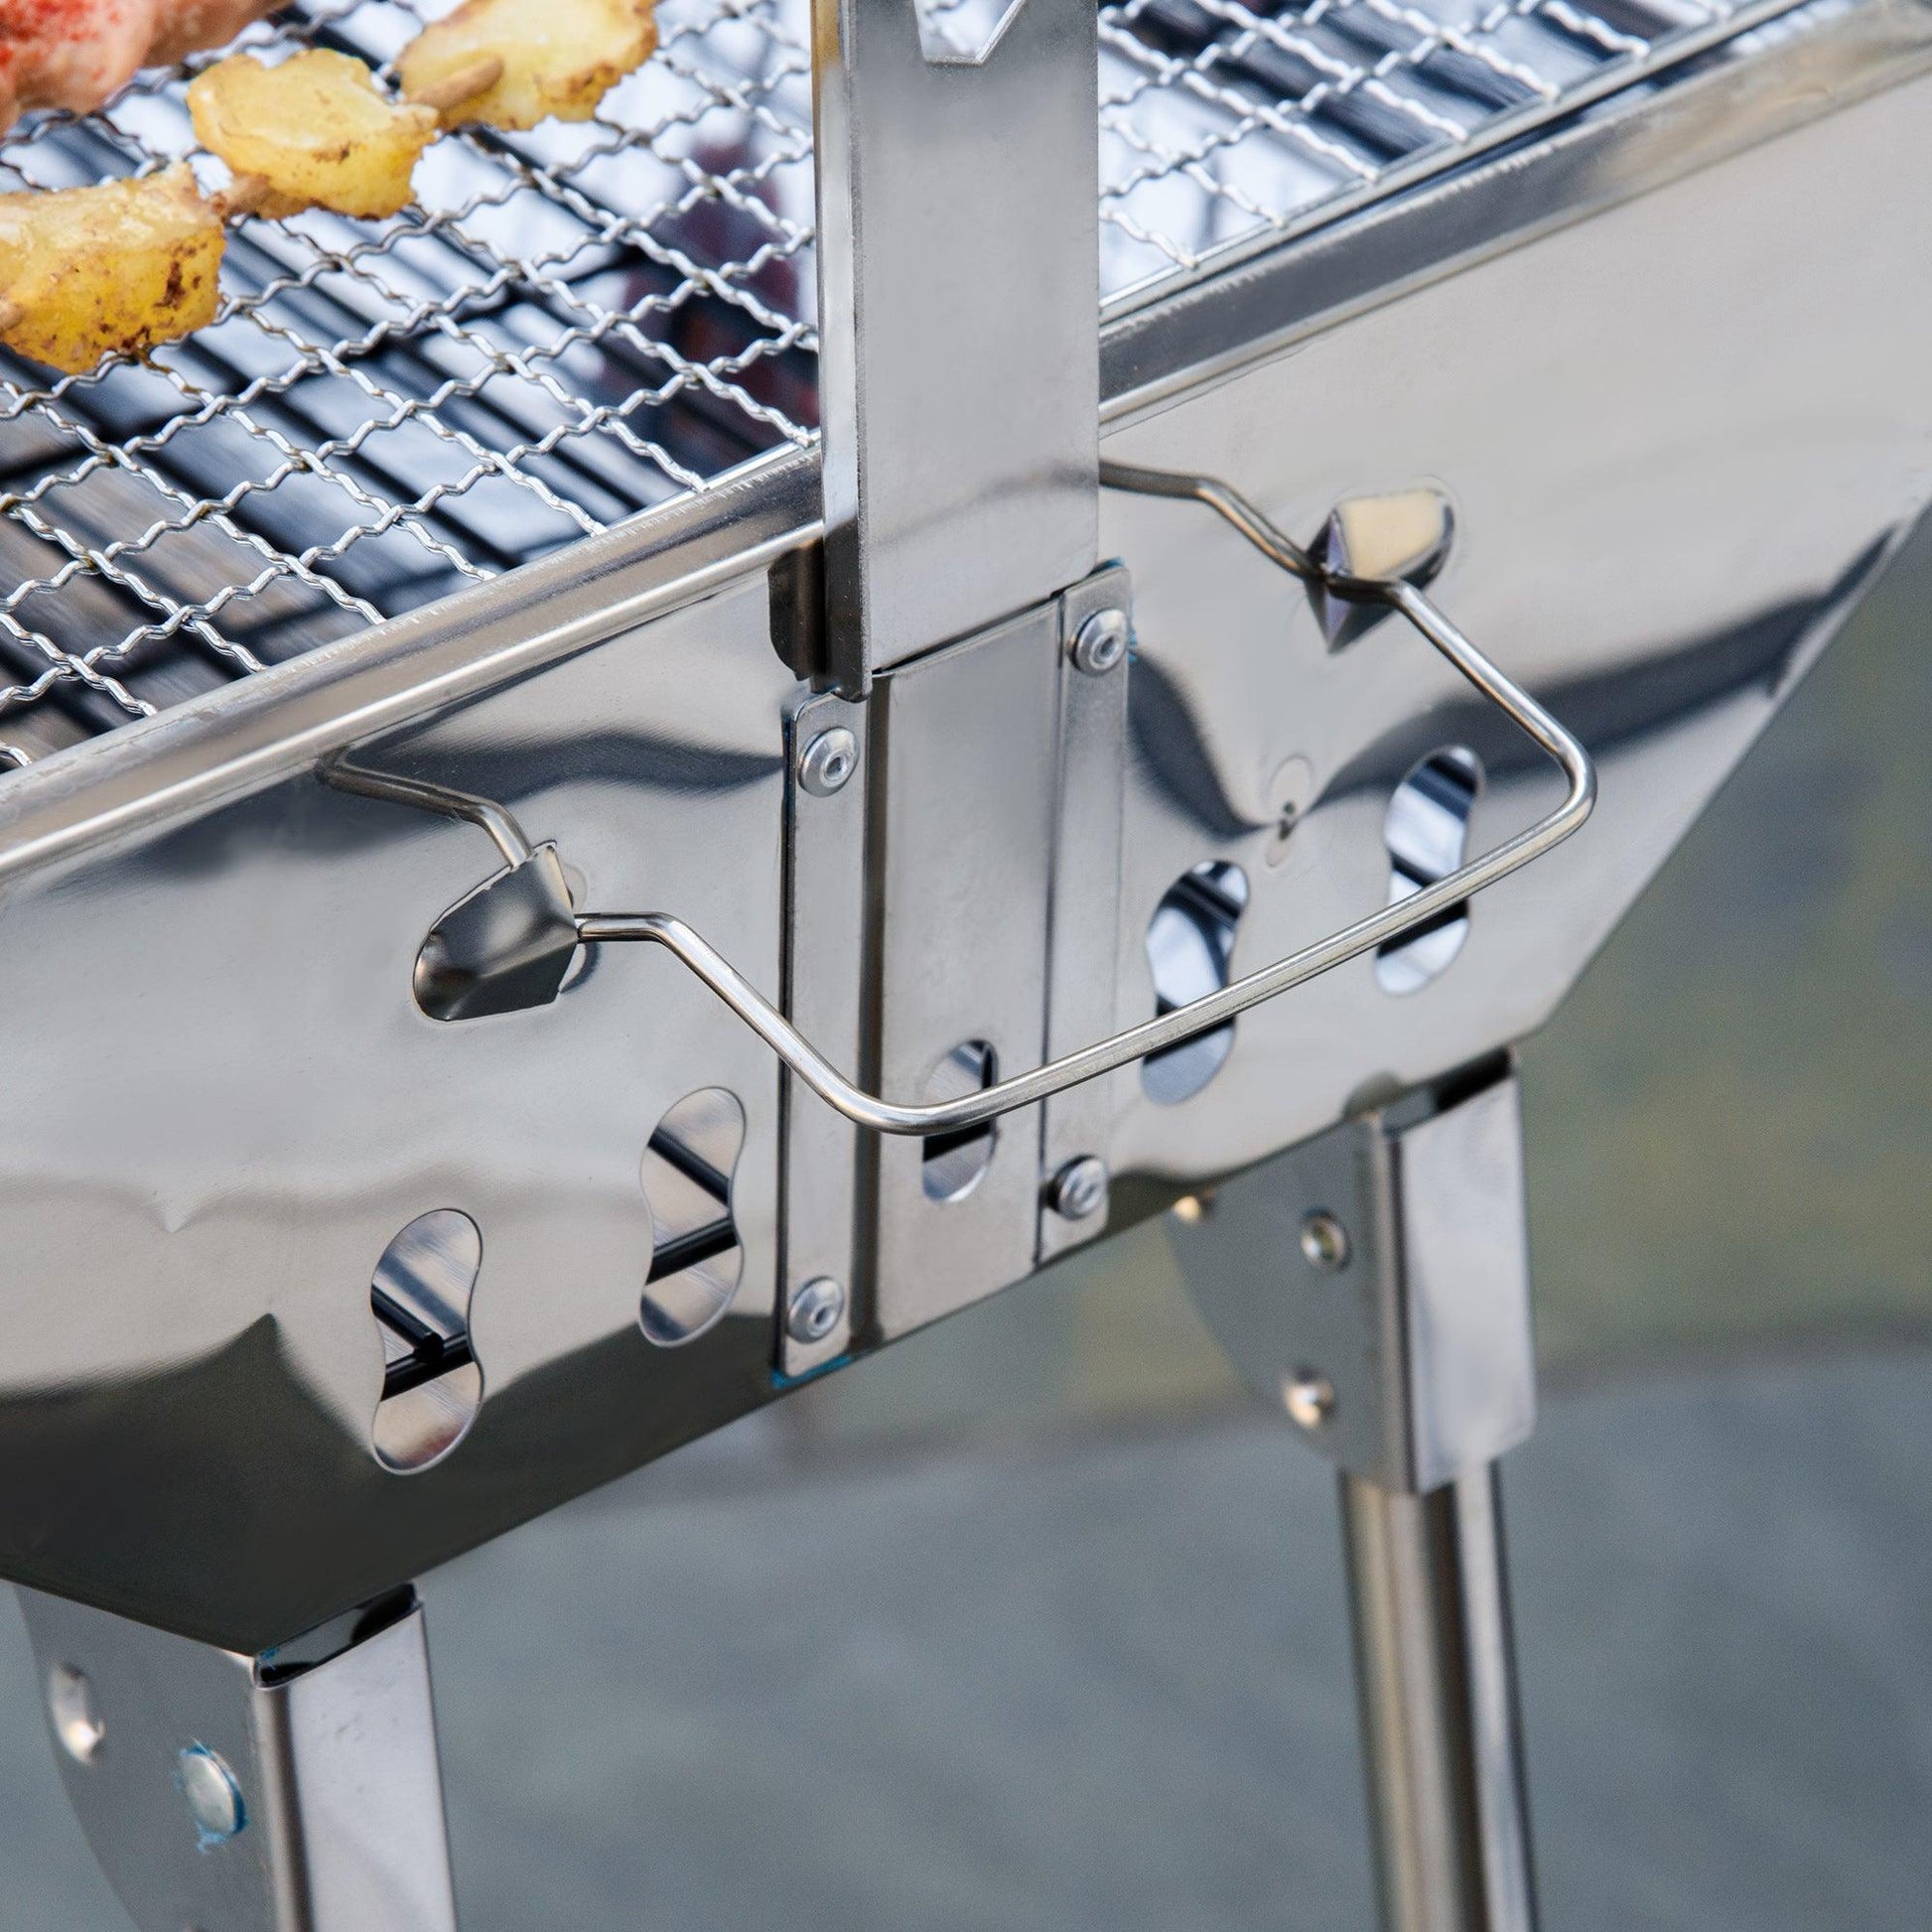 Outsunny Portable BBQ Grill with Rotisserie - Easy Outdoor Cooking - ALL4U RETAILER LTD